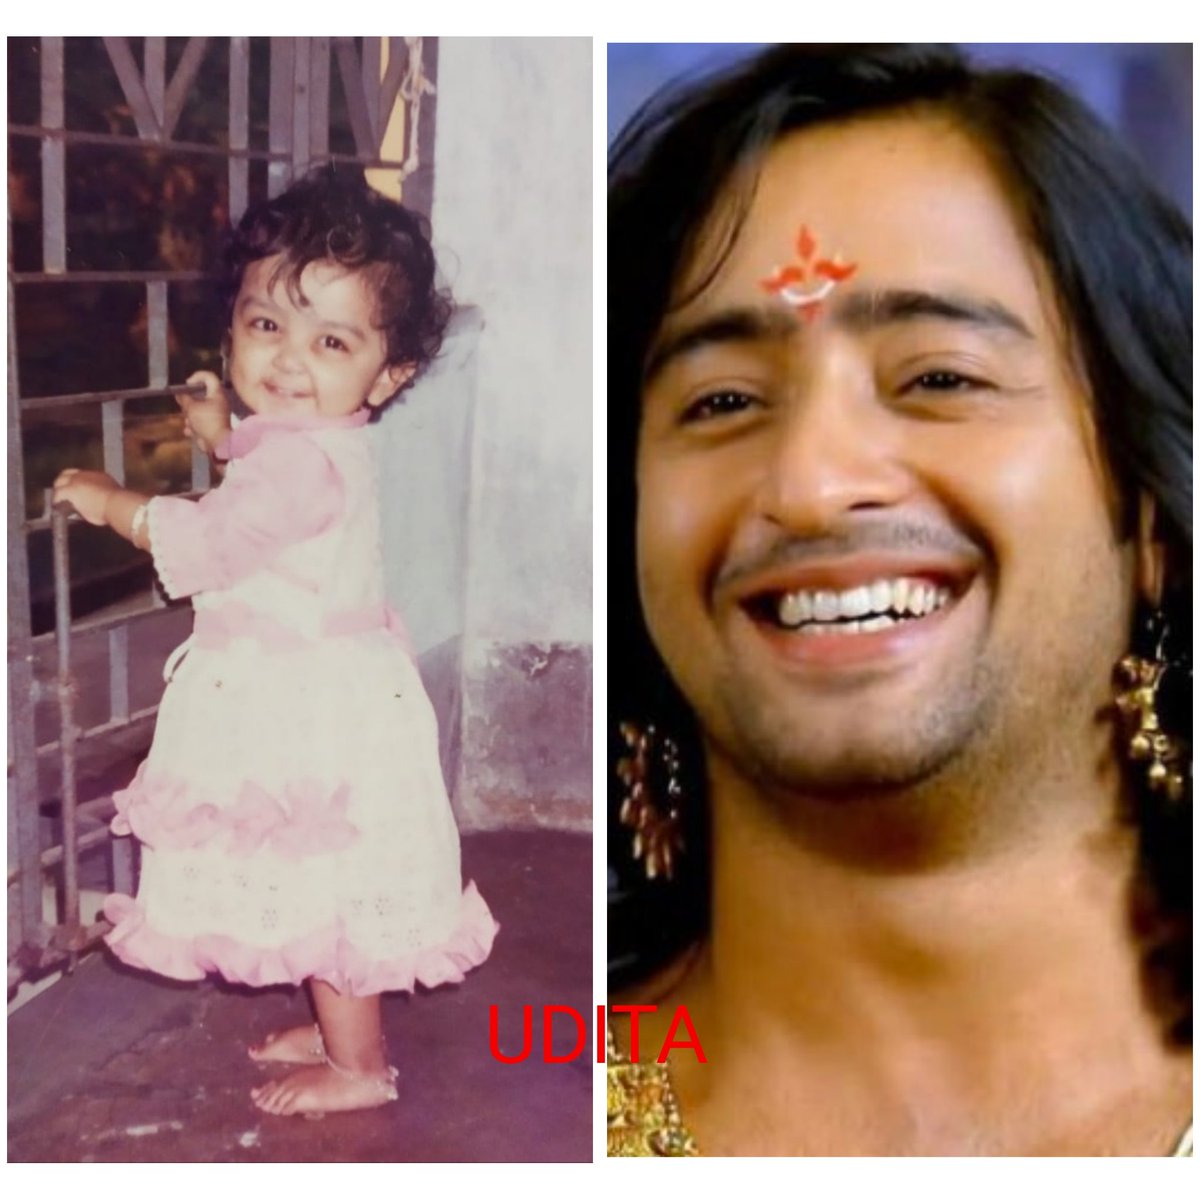 Smile more. Worry a little less. Be happy for yourself and spread joy everywhere you go. A smiling heart enables you to be happy for others too. Smile, an everlasting smile...  @Shaheer_S  #ShaheerSheikh Hope everyone smiles after reading this thread!